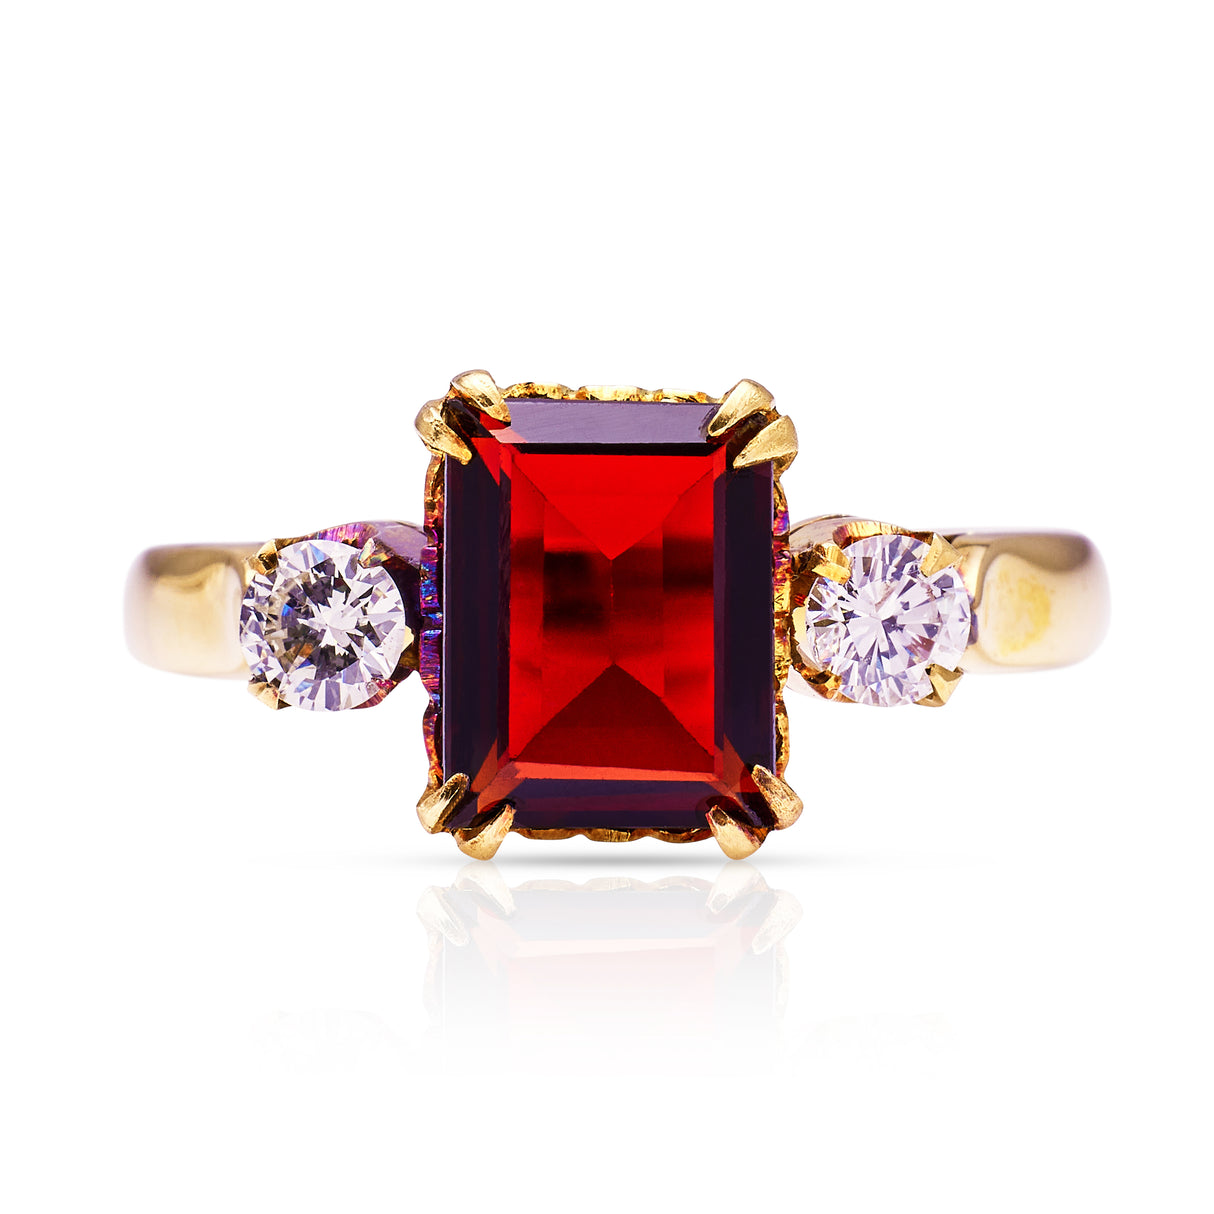 Vintage, 1940s Three-Stone Garnet and Diamond Ring, 18ct Rosy Yellow Gold front view